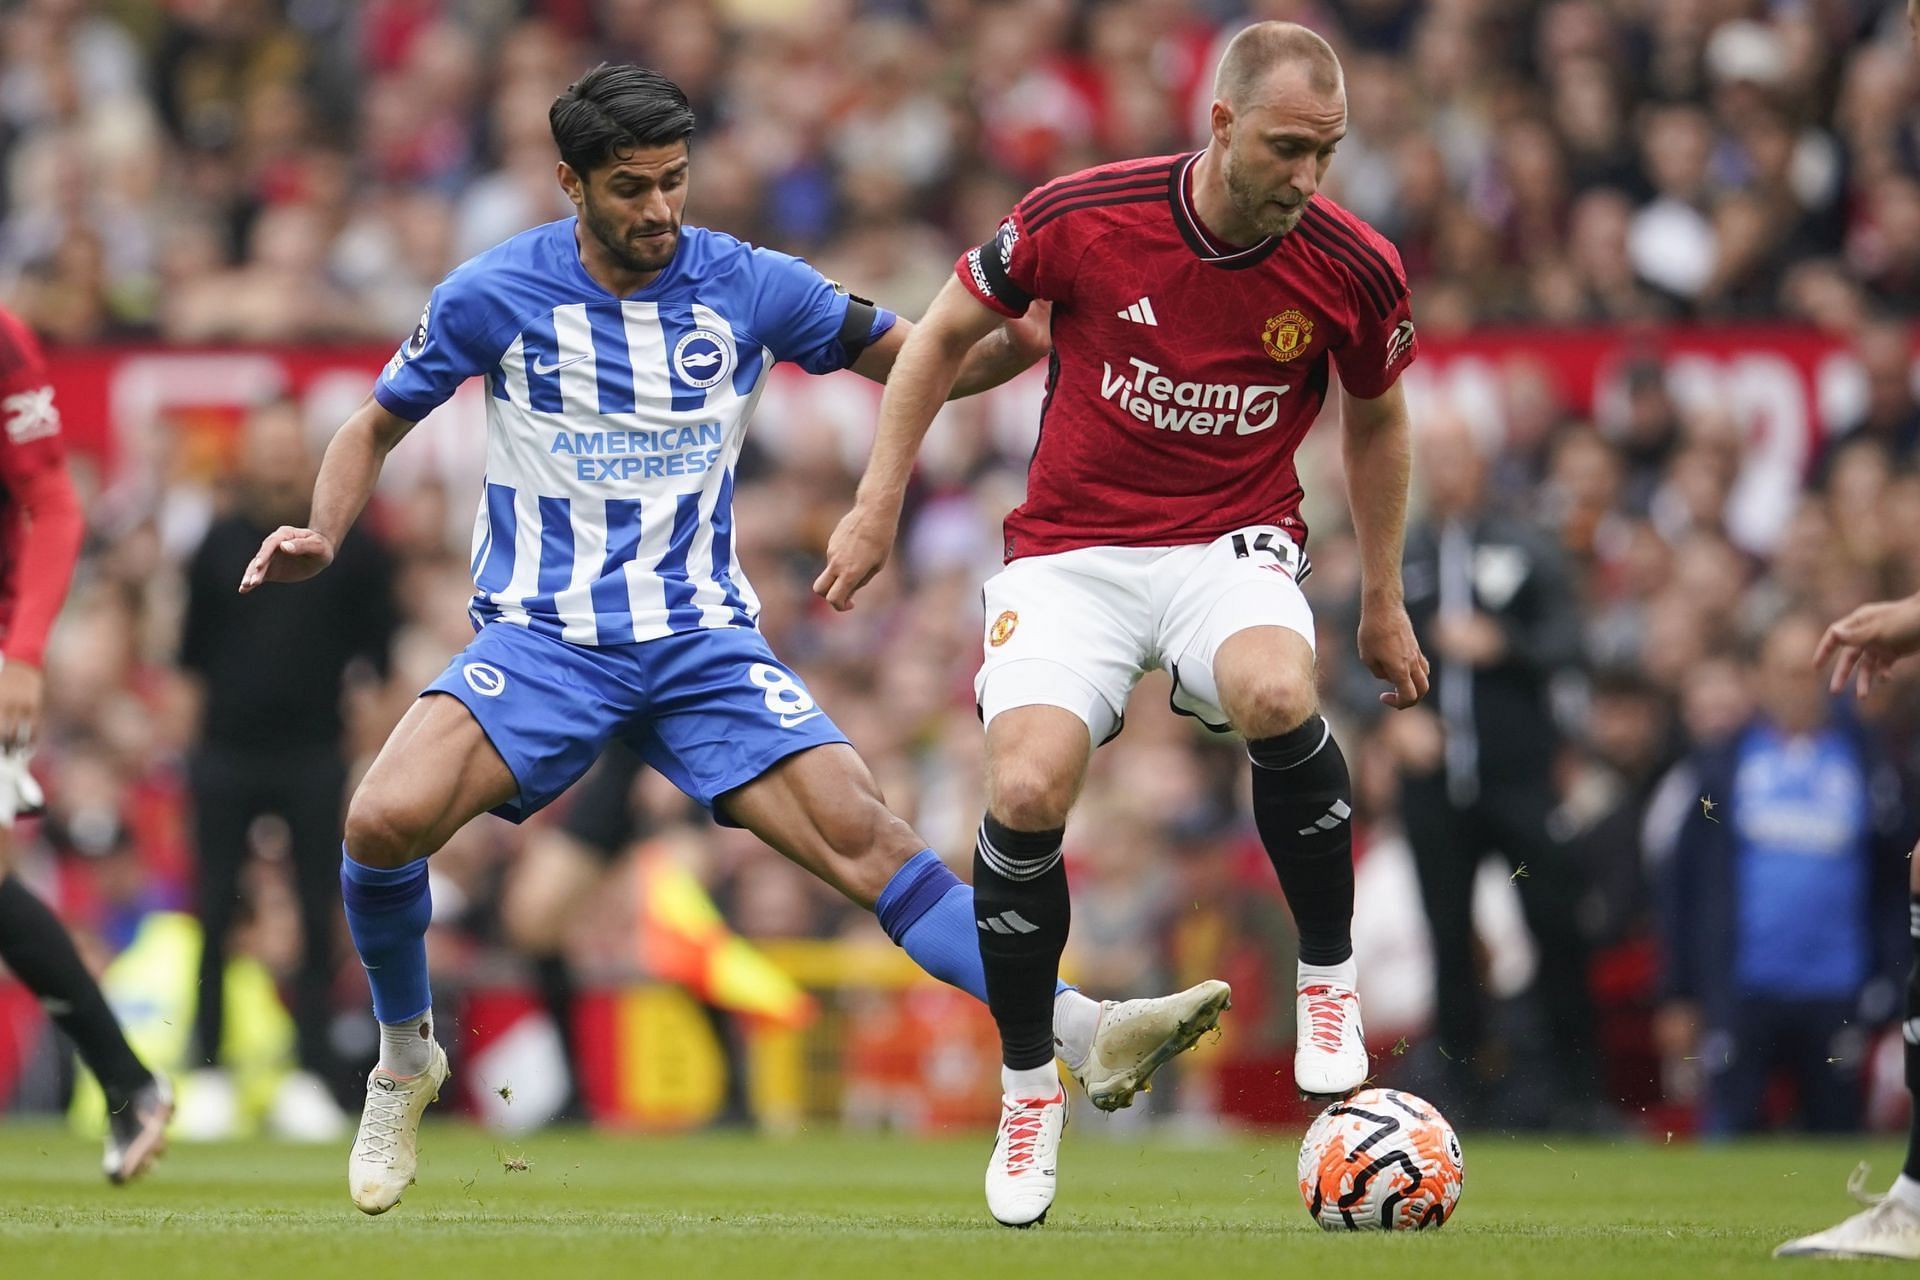 Manchester United were blown away by Brighton on matchday 5 in the Premier League this season.